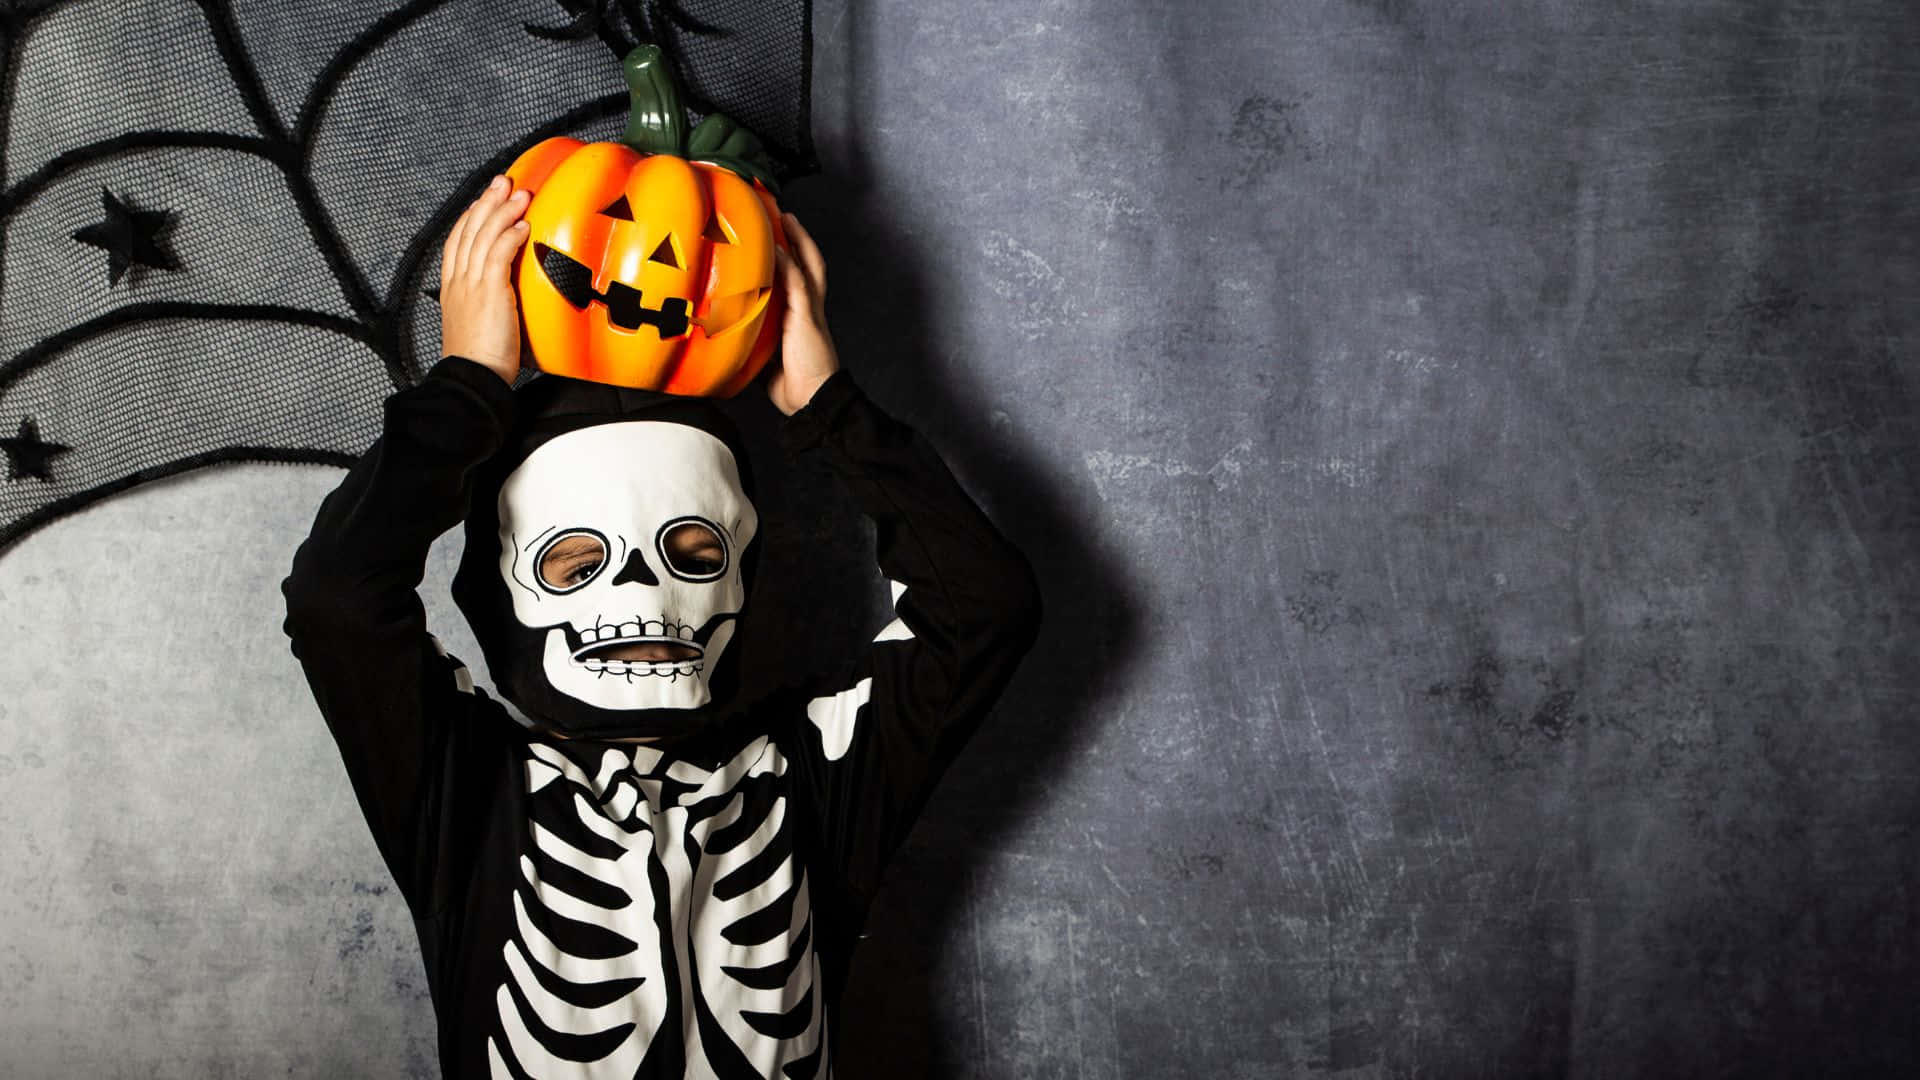 Sink Your Teeth Into This Spooky Skeleton Costume! Wallpaper